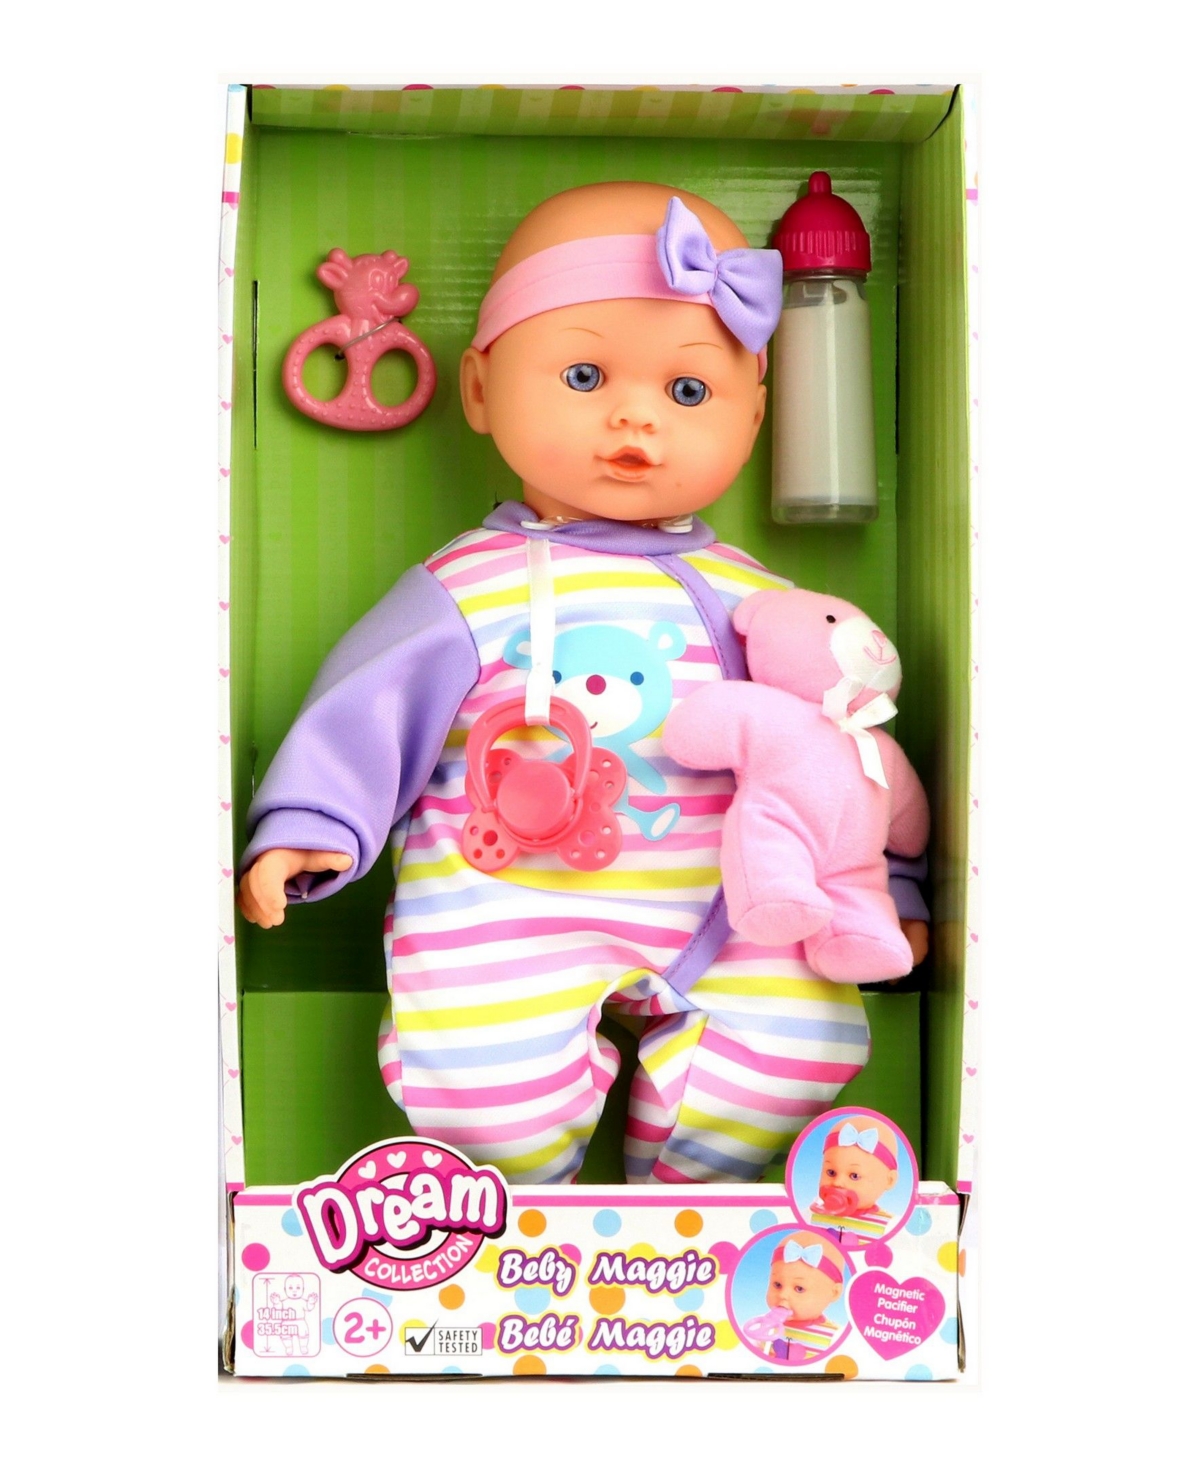 Redbox Dream Collection 14" Baby Doll Maggie With Teddy In Multi